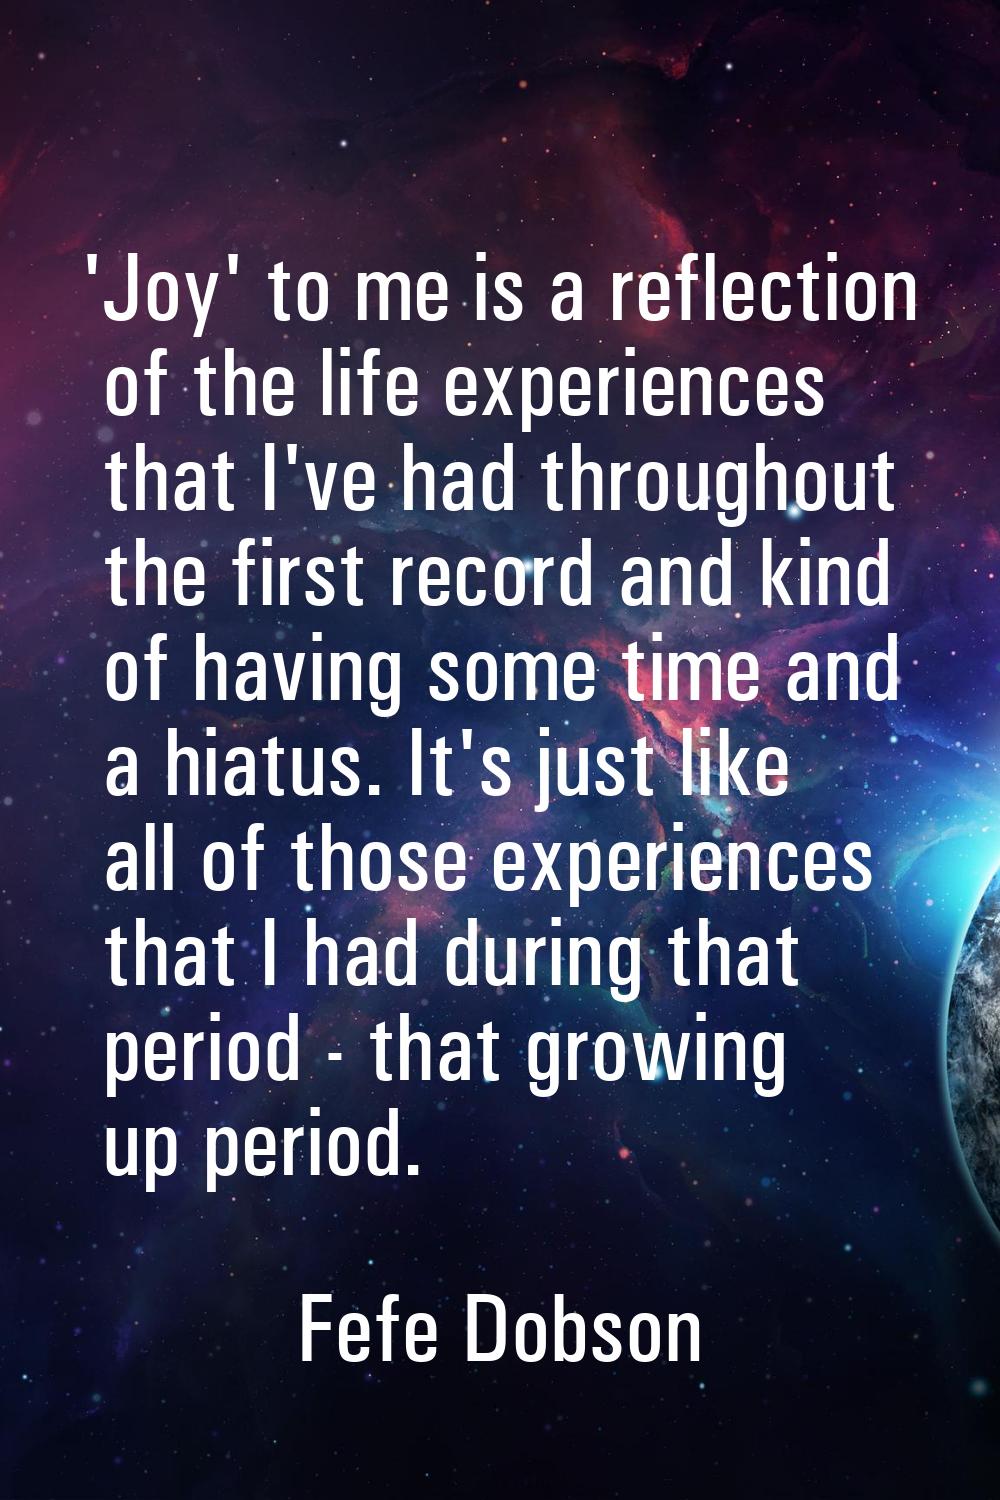 'Joy' to me is a reflection of the life experiences that I've had throughout the first record and k